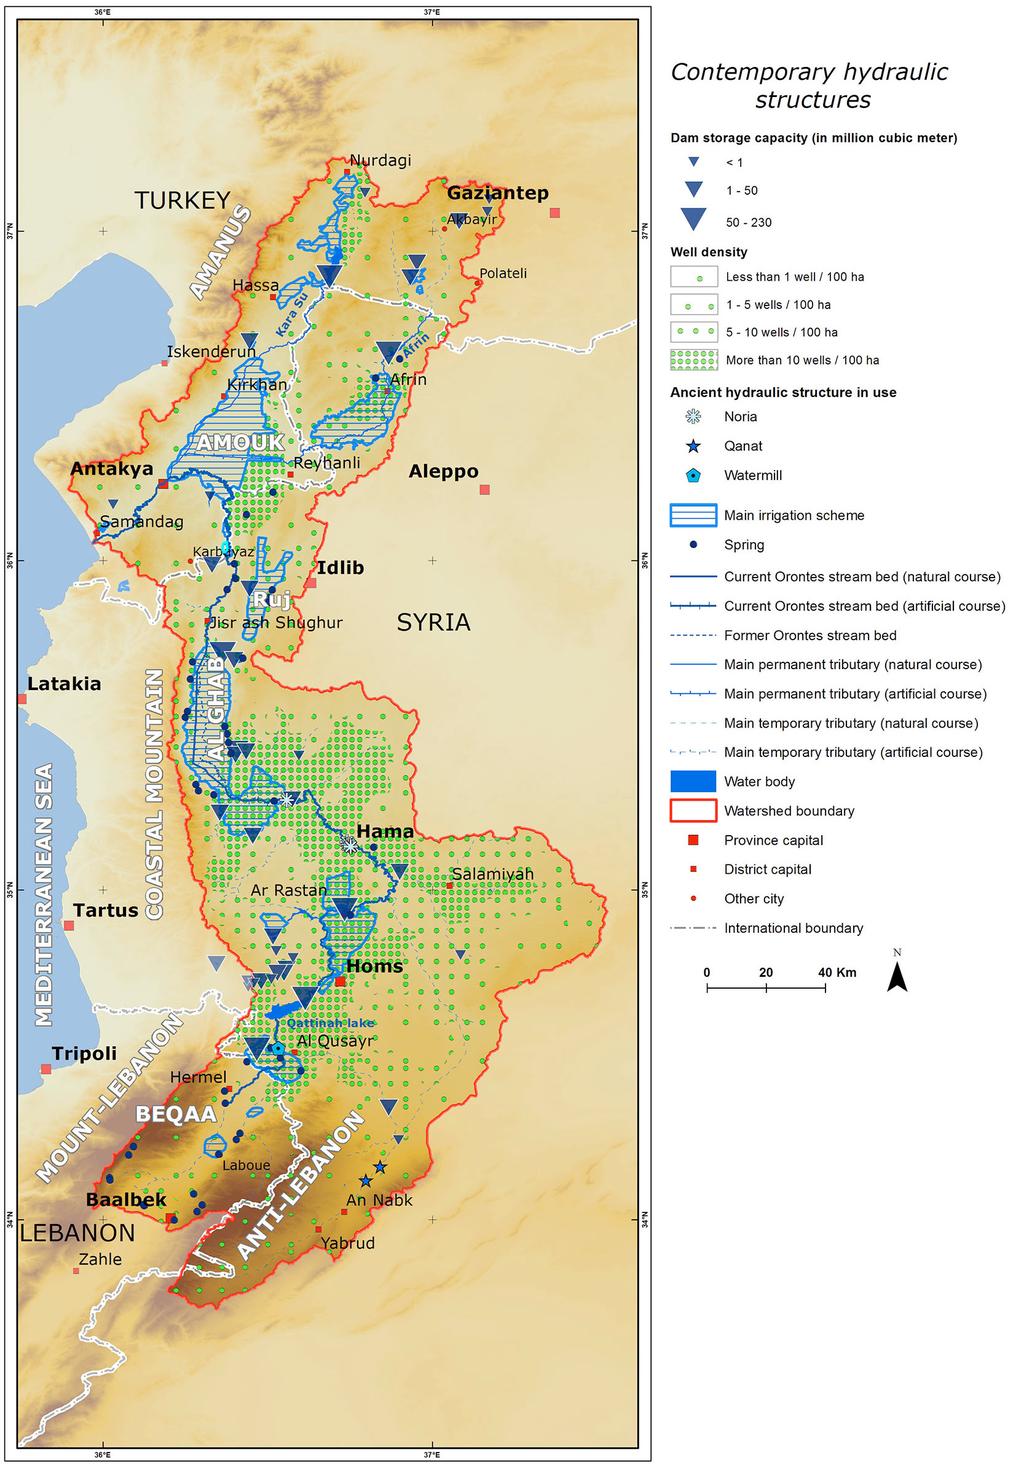 Development and Management of Water Resources of Turkey with Specific Reference to Asi Basin 33 Figure 2 Overview of the Asi River basin https://www.water-security.